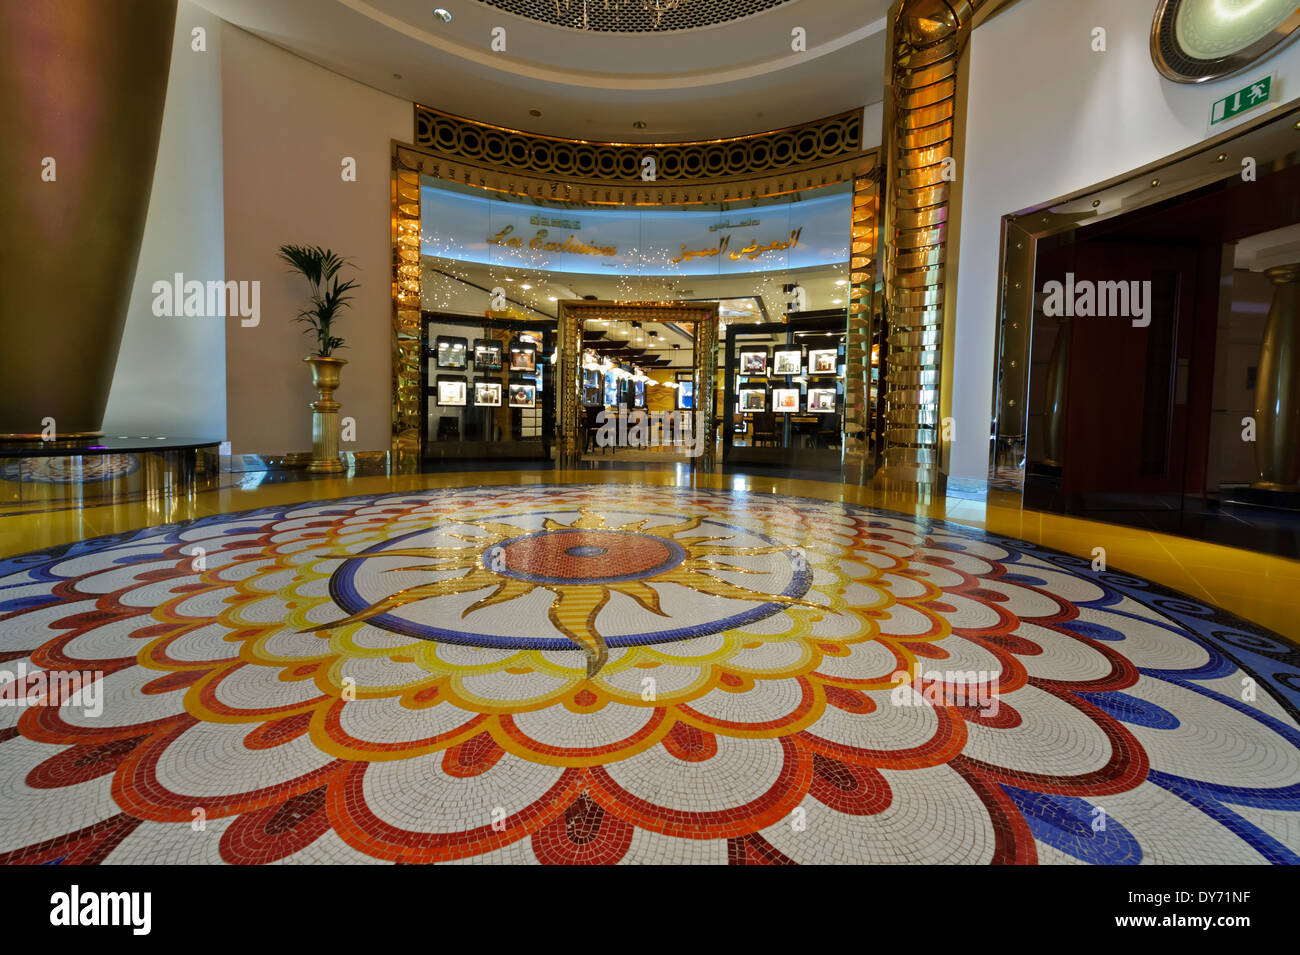 The magnificent mosaic flooring at the Burj Al Arab, classed as one of the most luxurious hotels in the world, UAE. Stock Photo